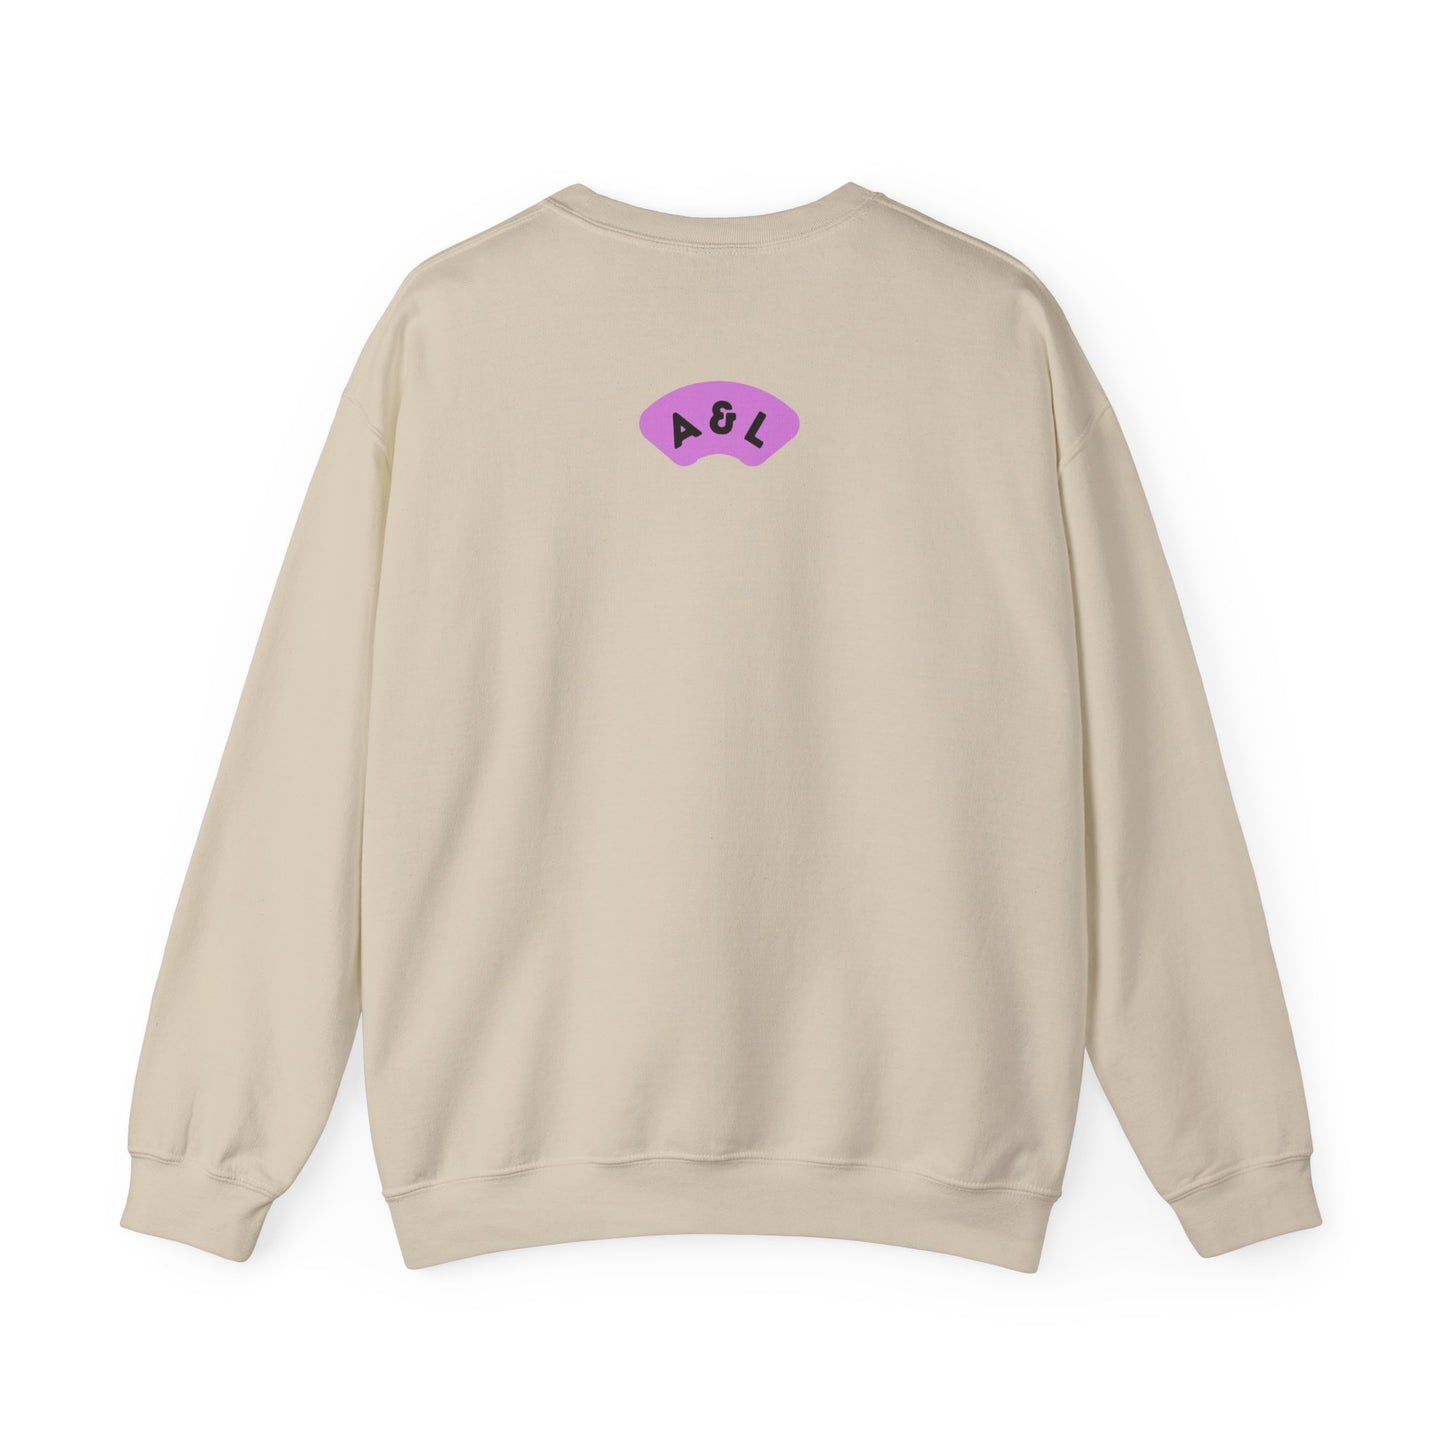 Who Do We Call L&A Elite Cleaning Sweatshirt